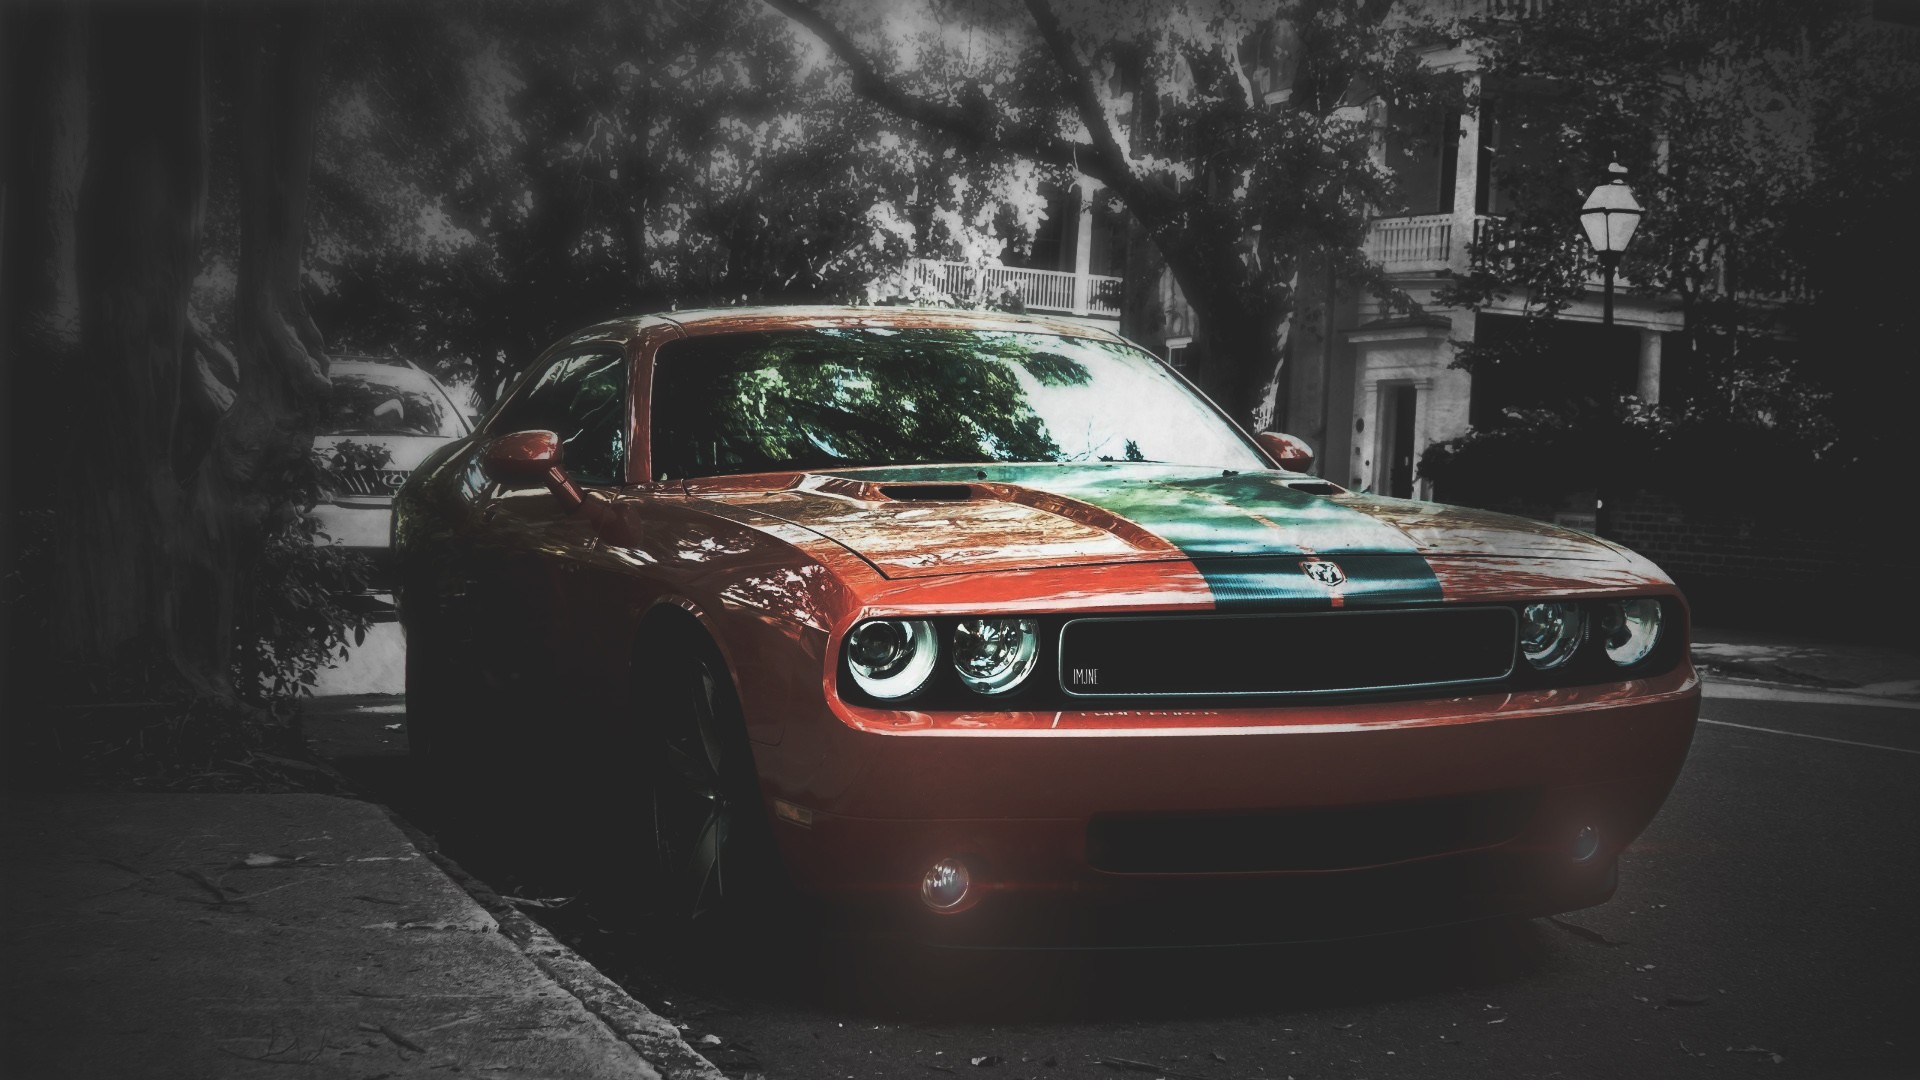 General 1920x1080 car blurred selective coloring Dodge Dodge Challenger red cars vehicle muscle cars American cars Stellantis racing stripes